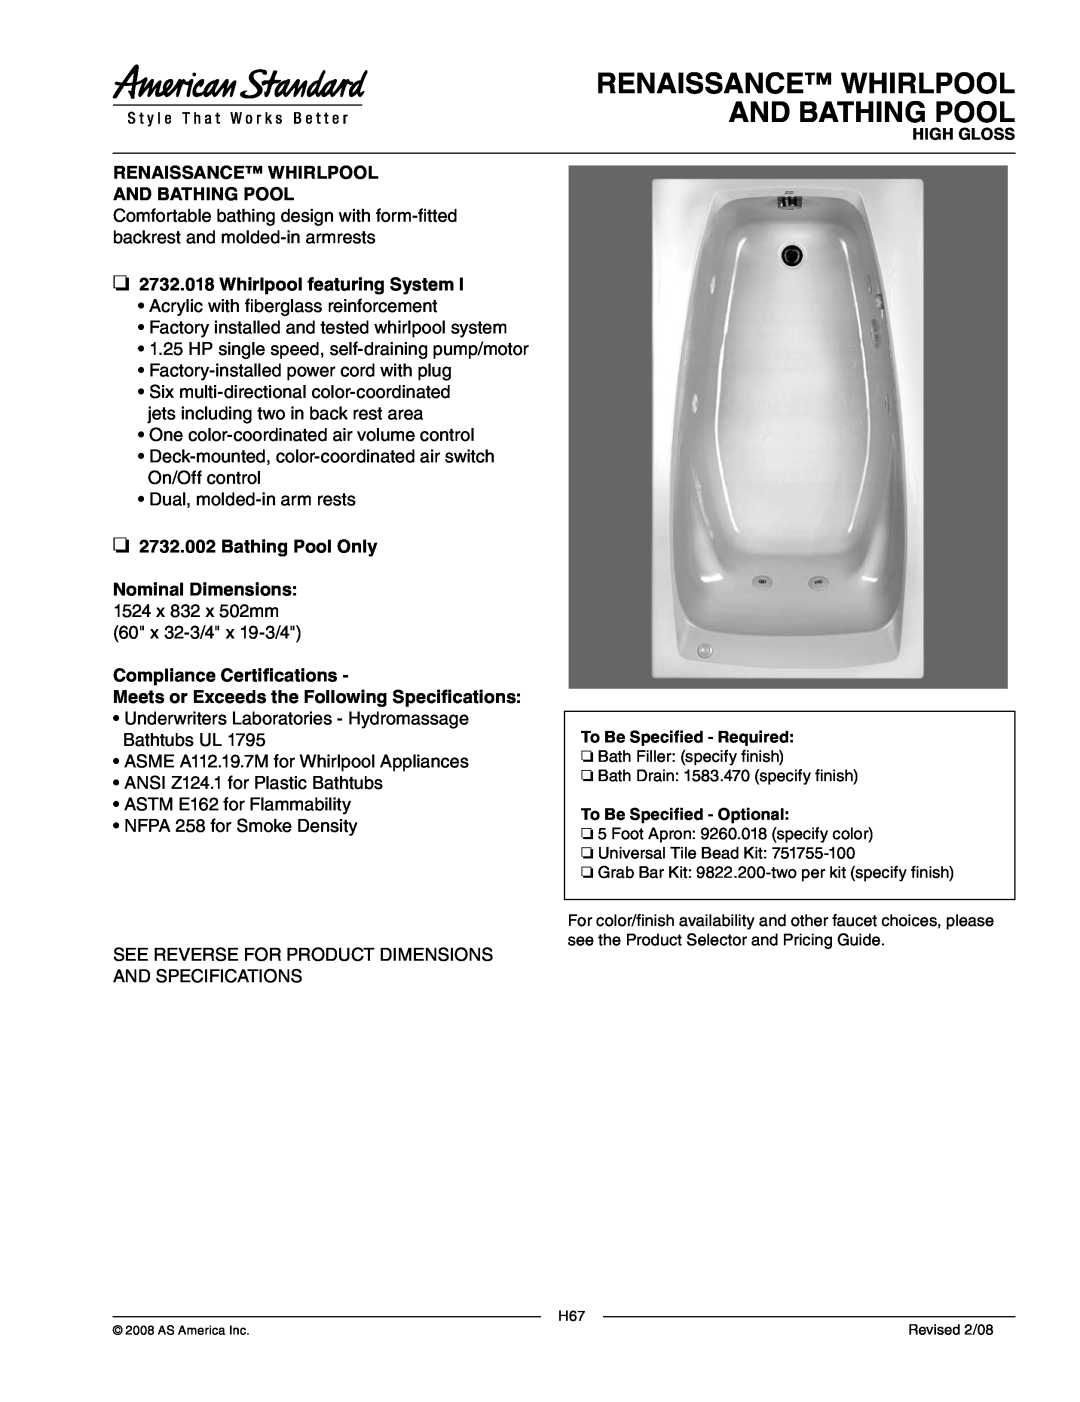 American Standard 2732.002 dimensions Renaissance Whirlpool And Bathing Pool, Whirlpool featuring System 